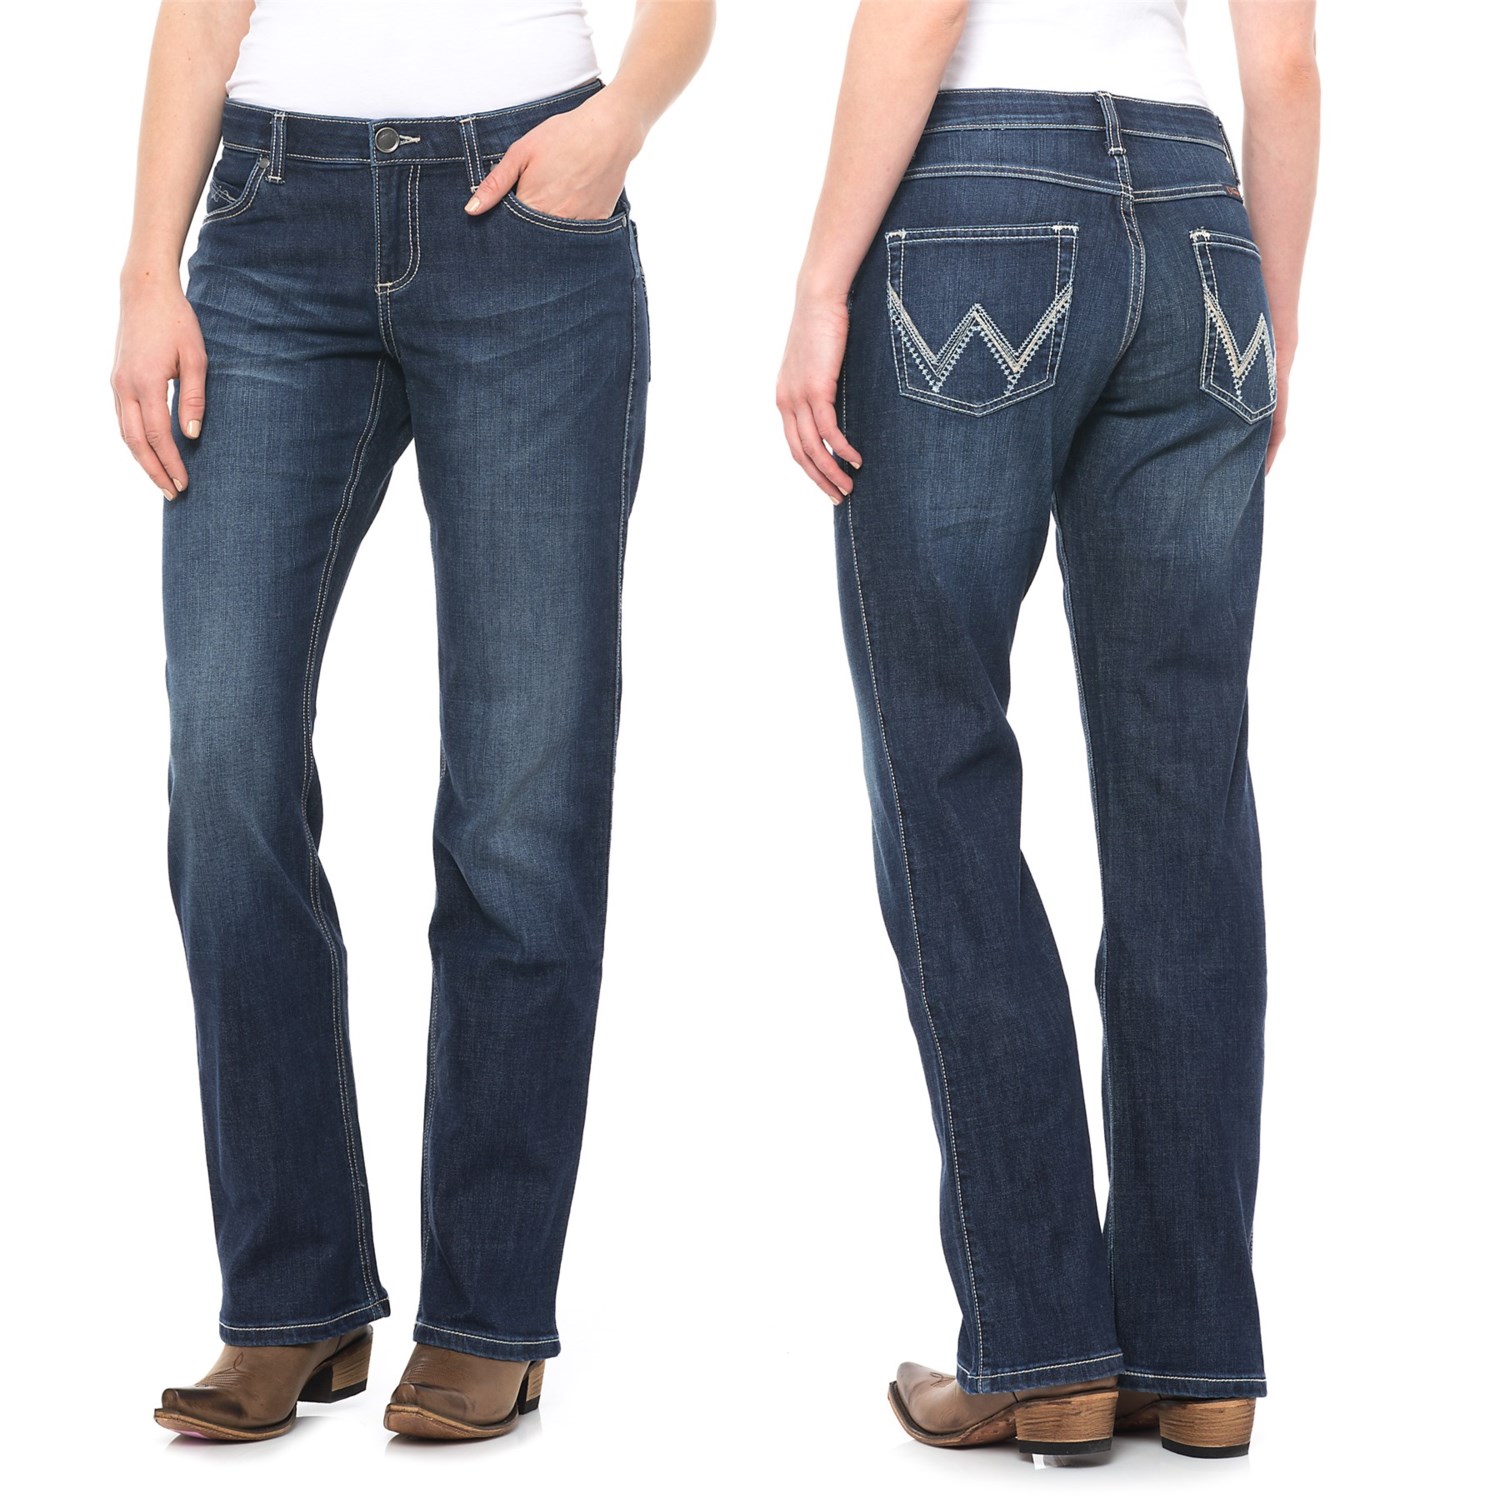 Wrangler Q-Baby Ultimate Riding Jeans (For Women) - Save 48%